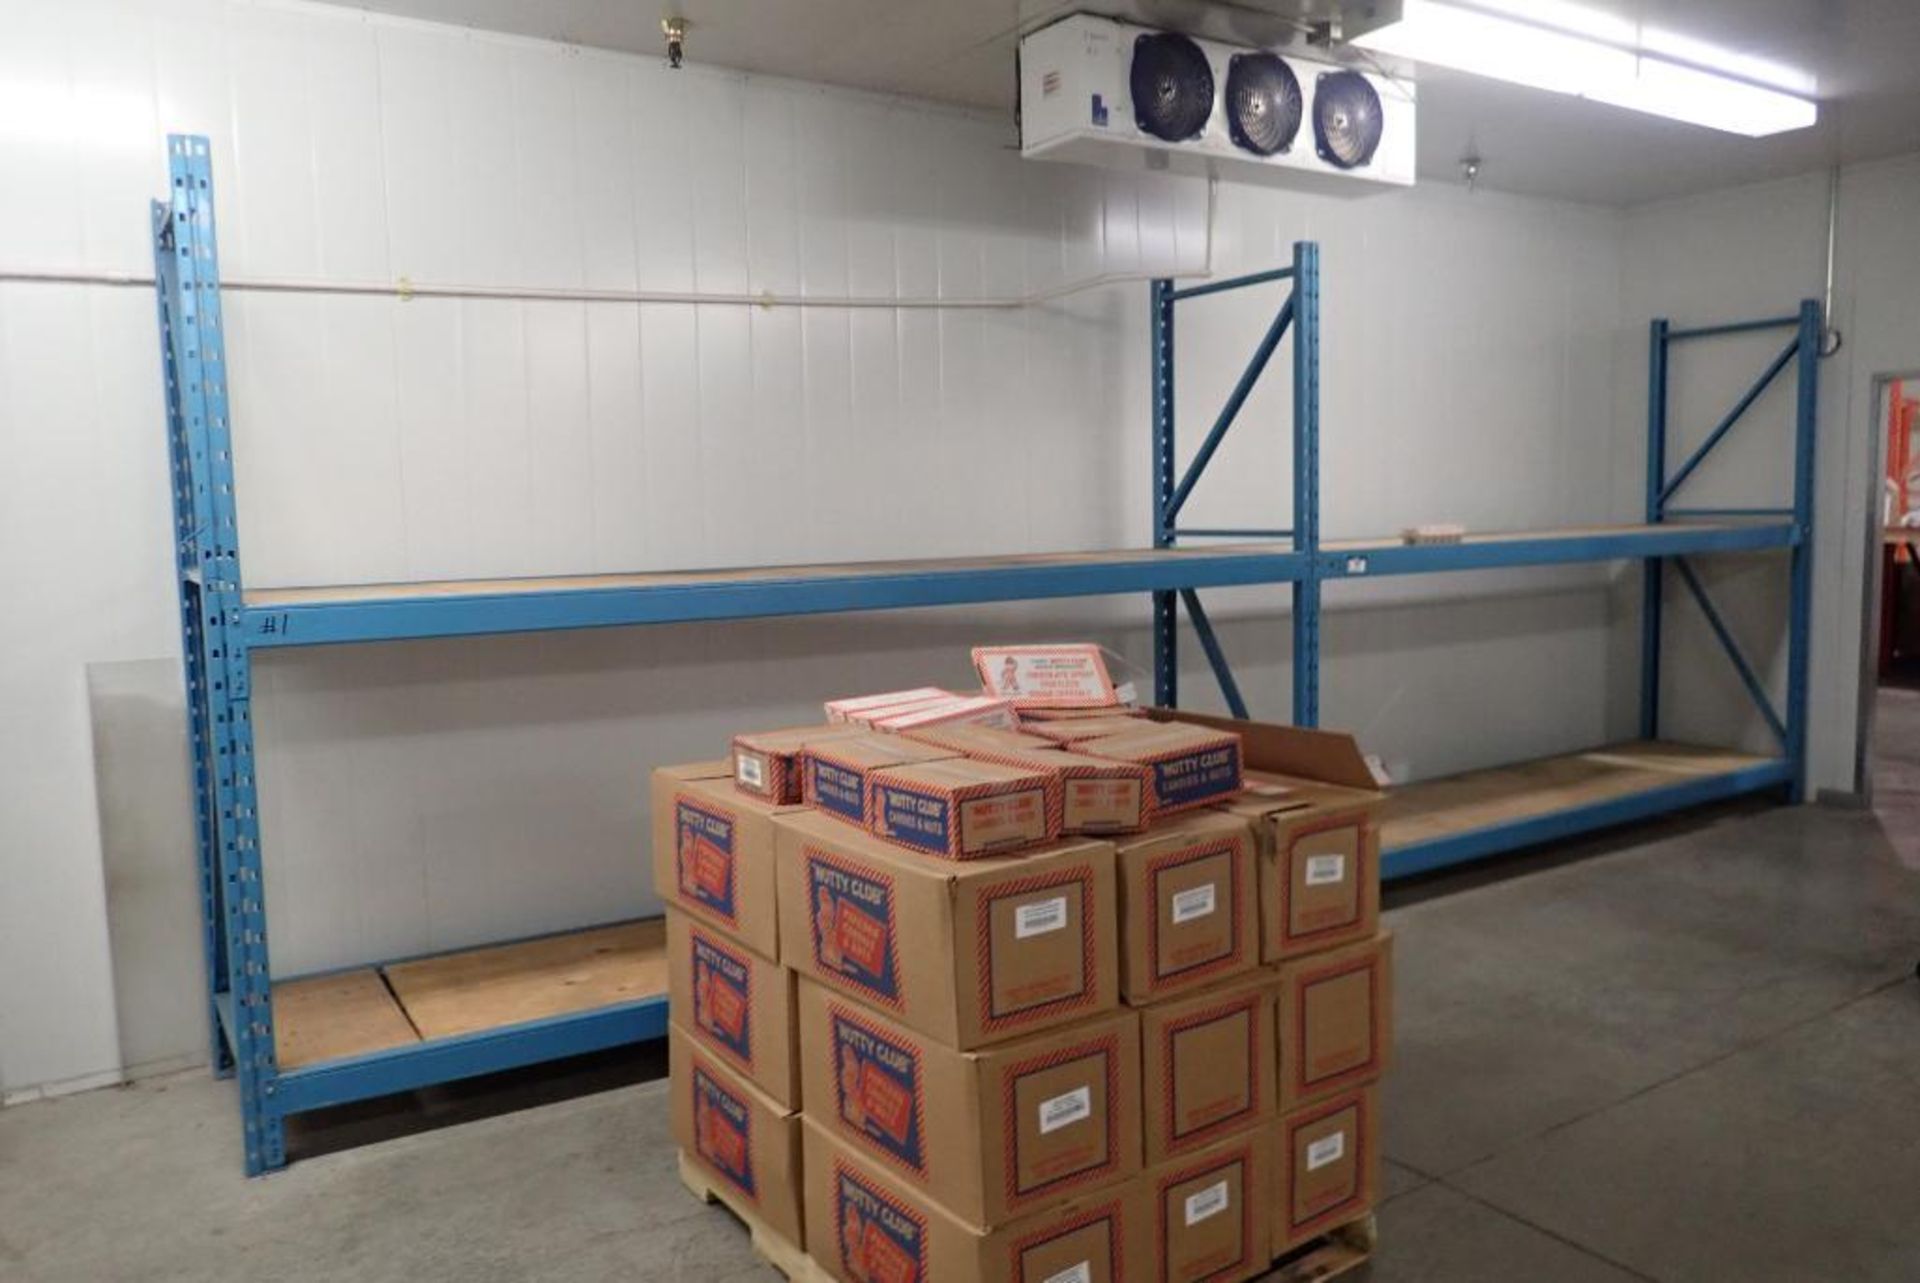 Lot of (3) Sections 11'x32"x8' Pallet Racking and (1) Section 150"x32"x4' Pallet Racking.